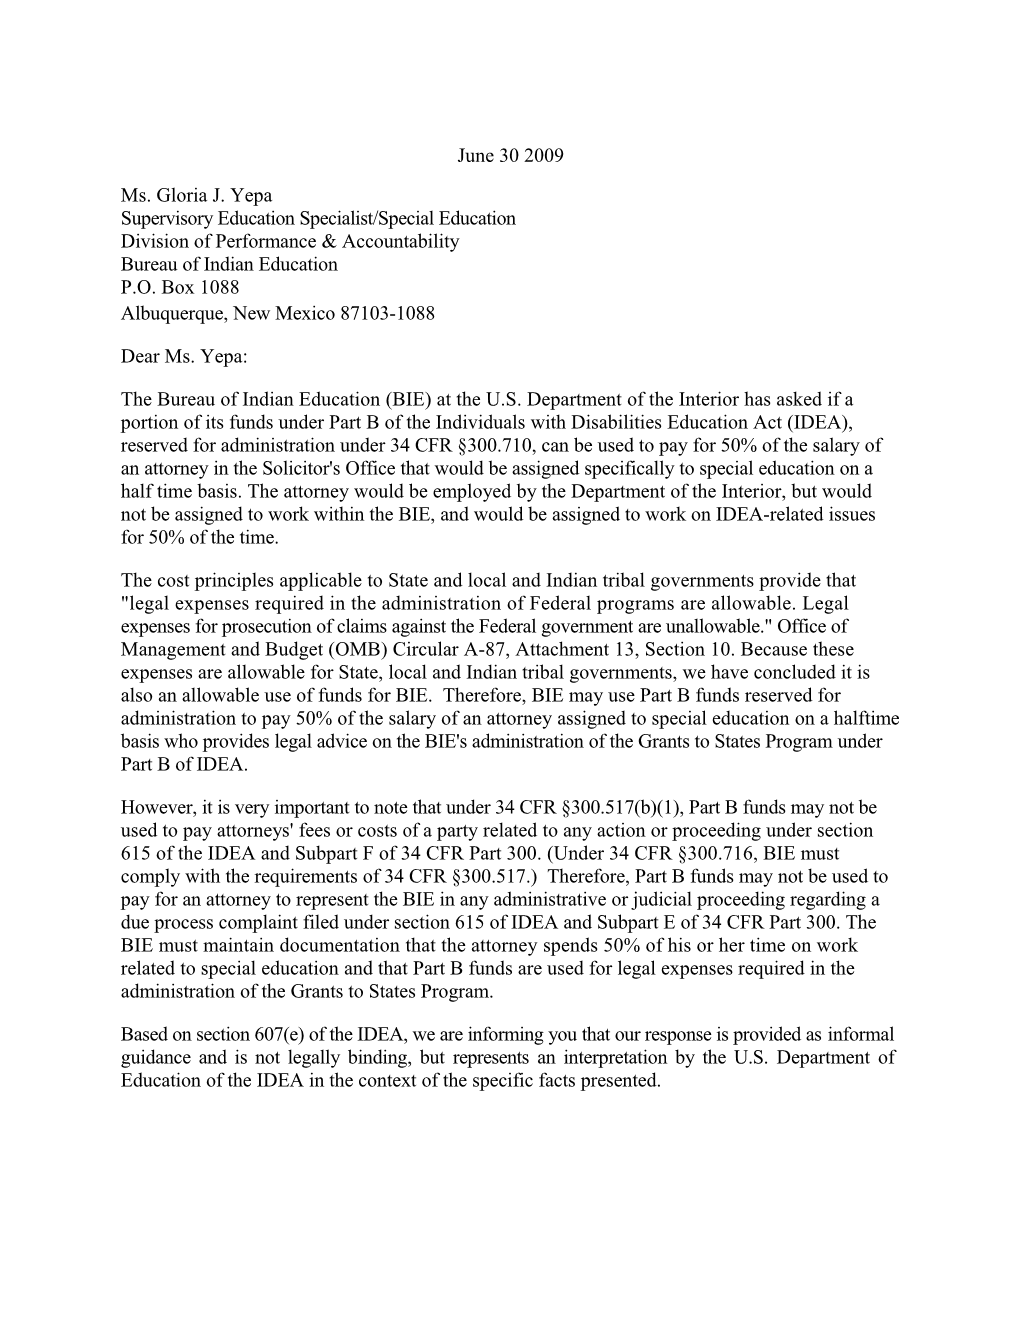 Yepa Letter Dated 06/30/09 Re: Use of Amounts by Secretary of the Interior (MS Word)